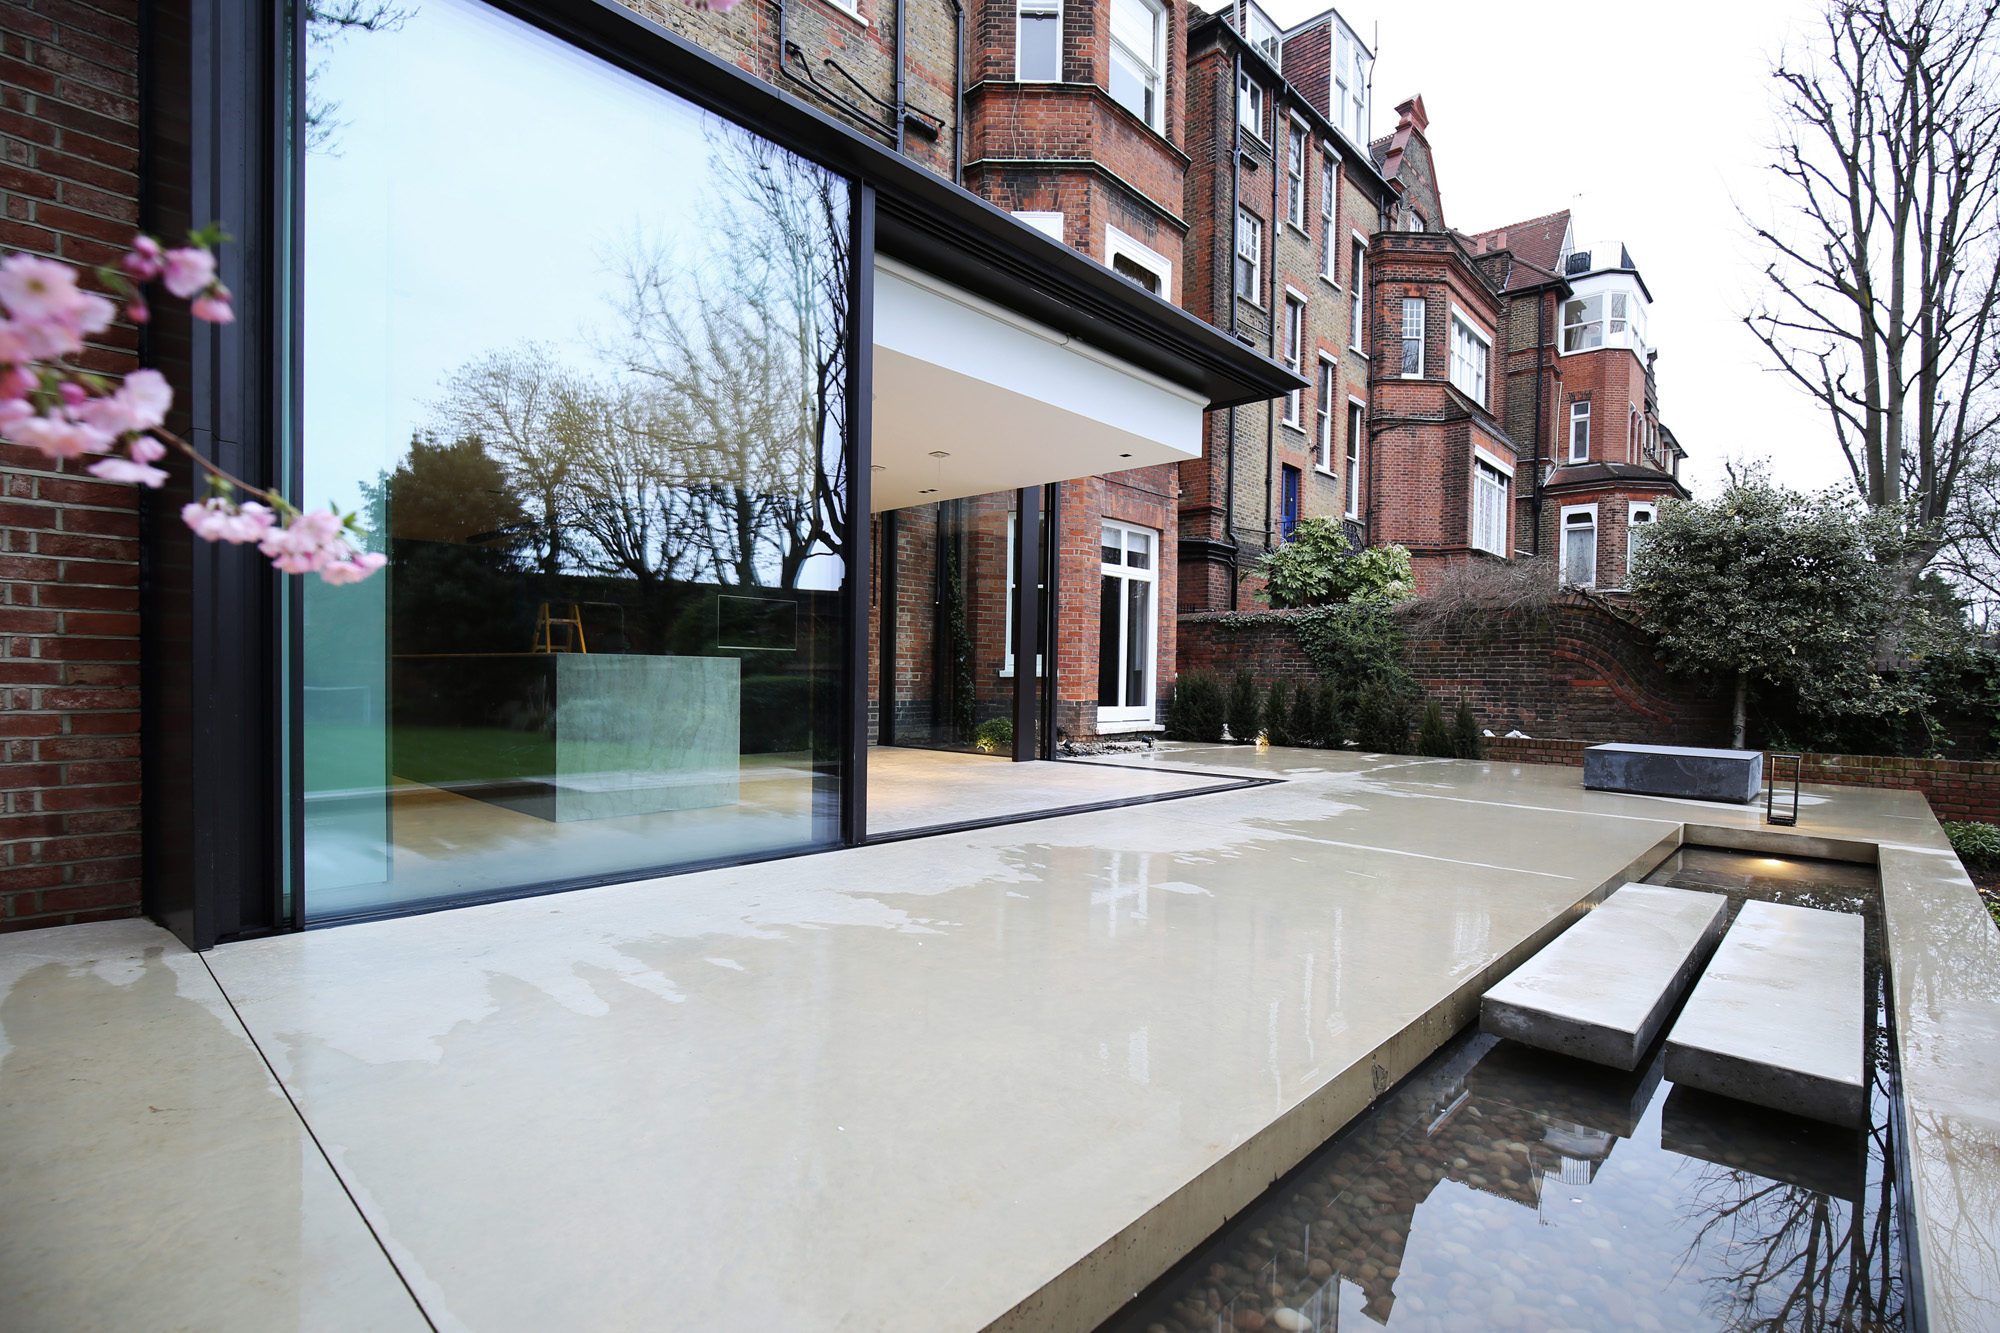 Glass windows and pond by LBMV Architects - luxury and modern architecture design studio in London